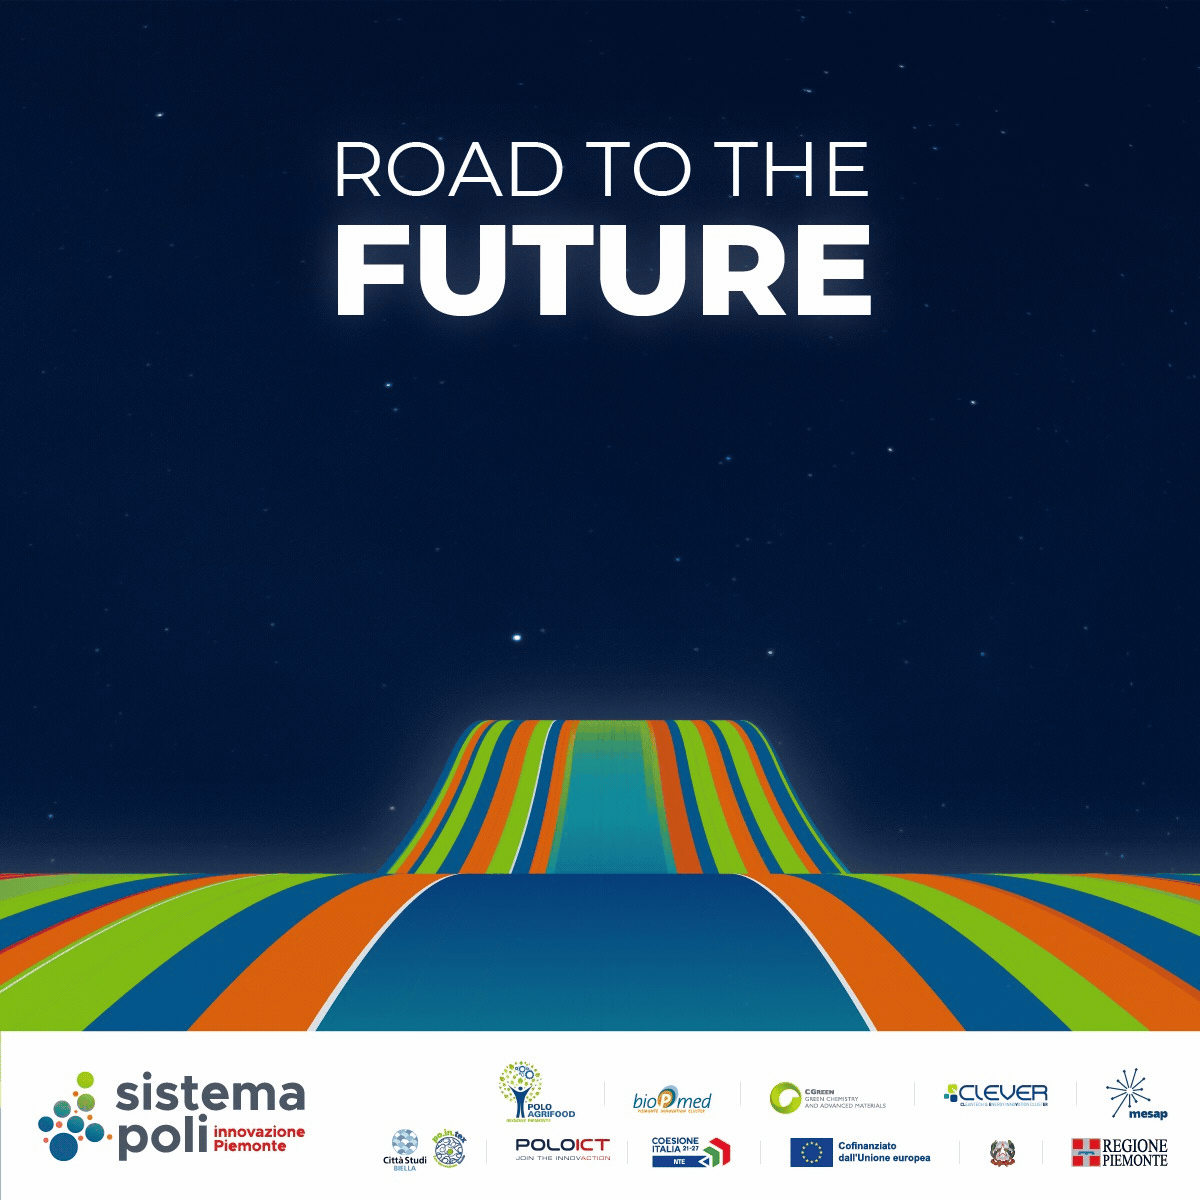 ROAD TO THE FUTURE